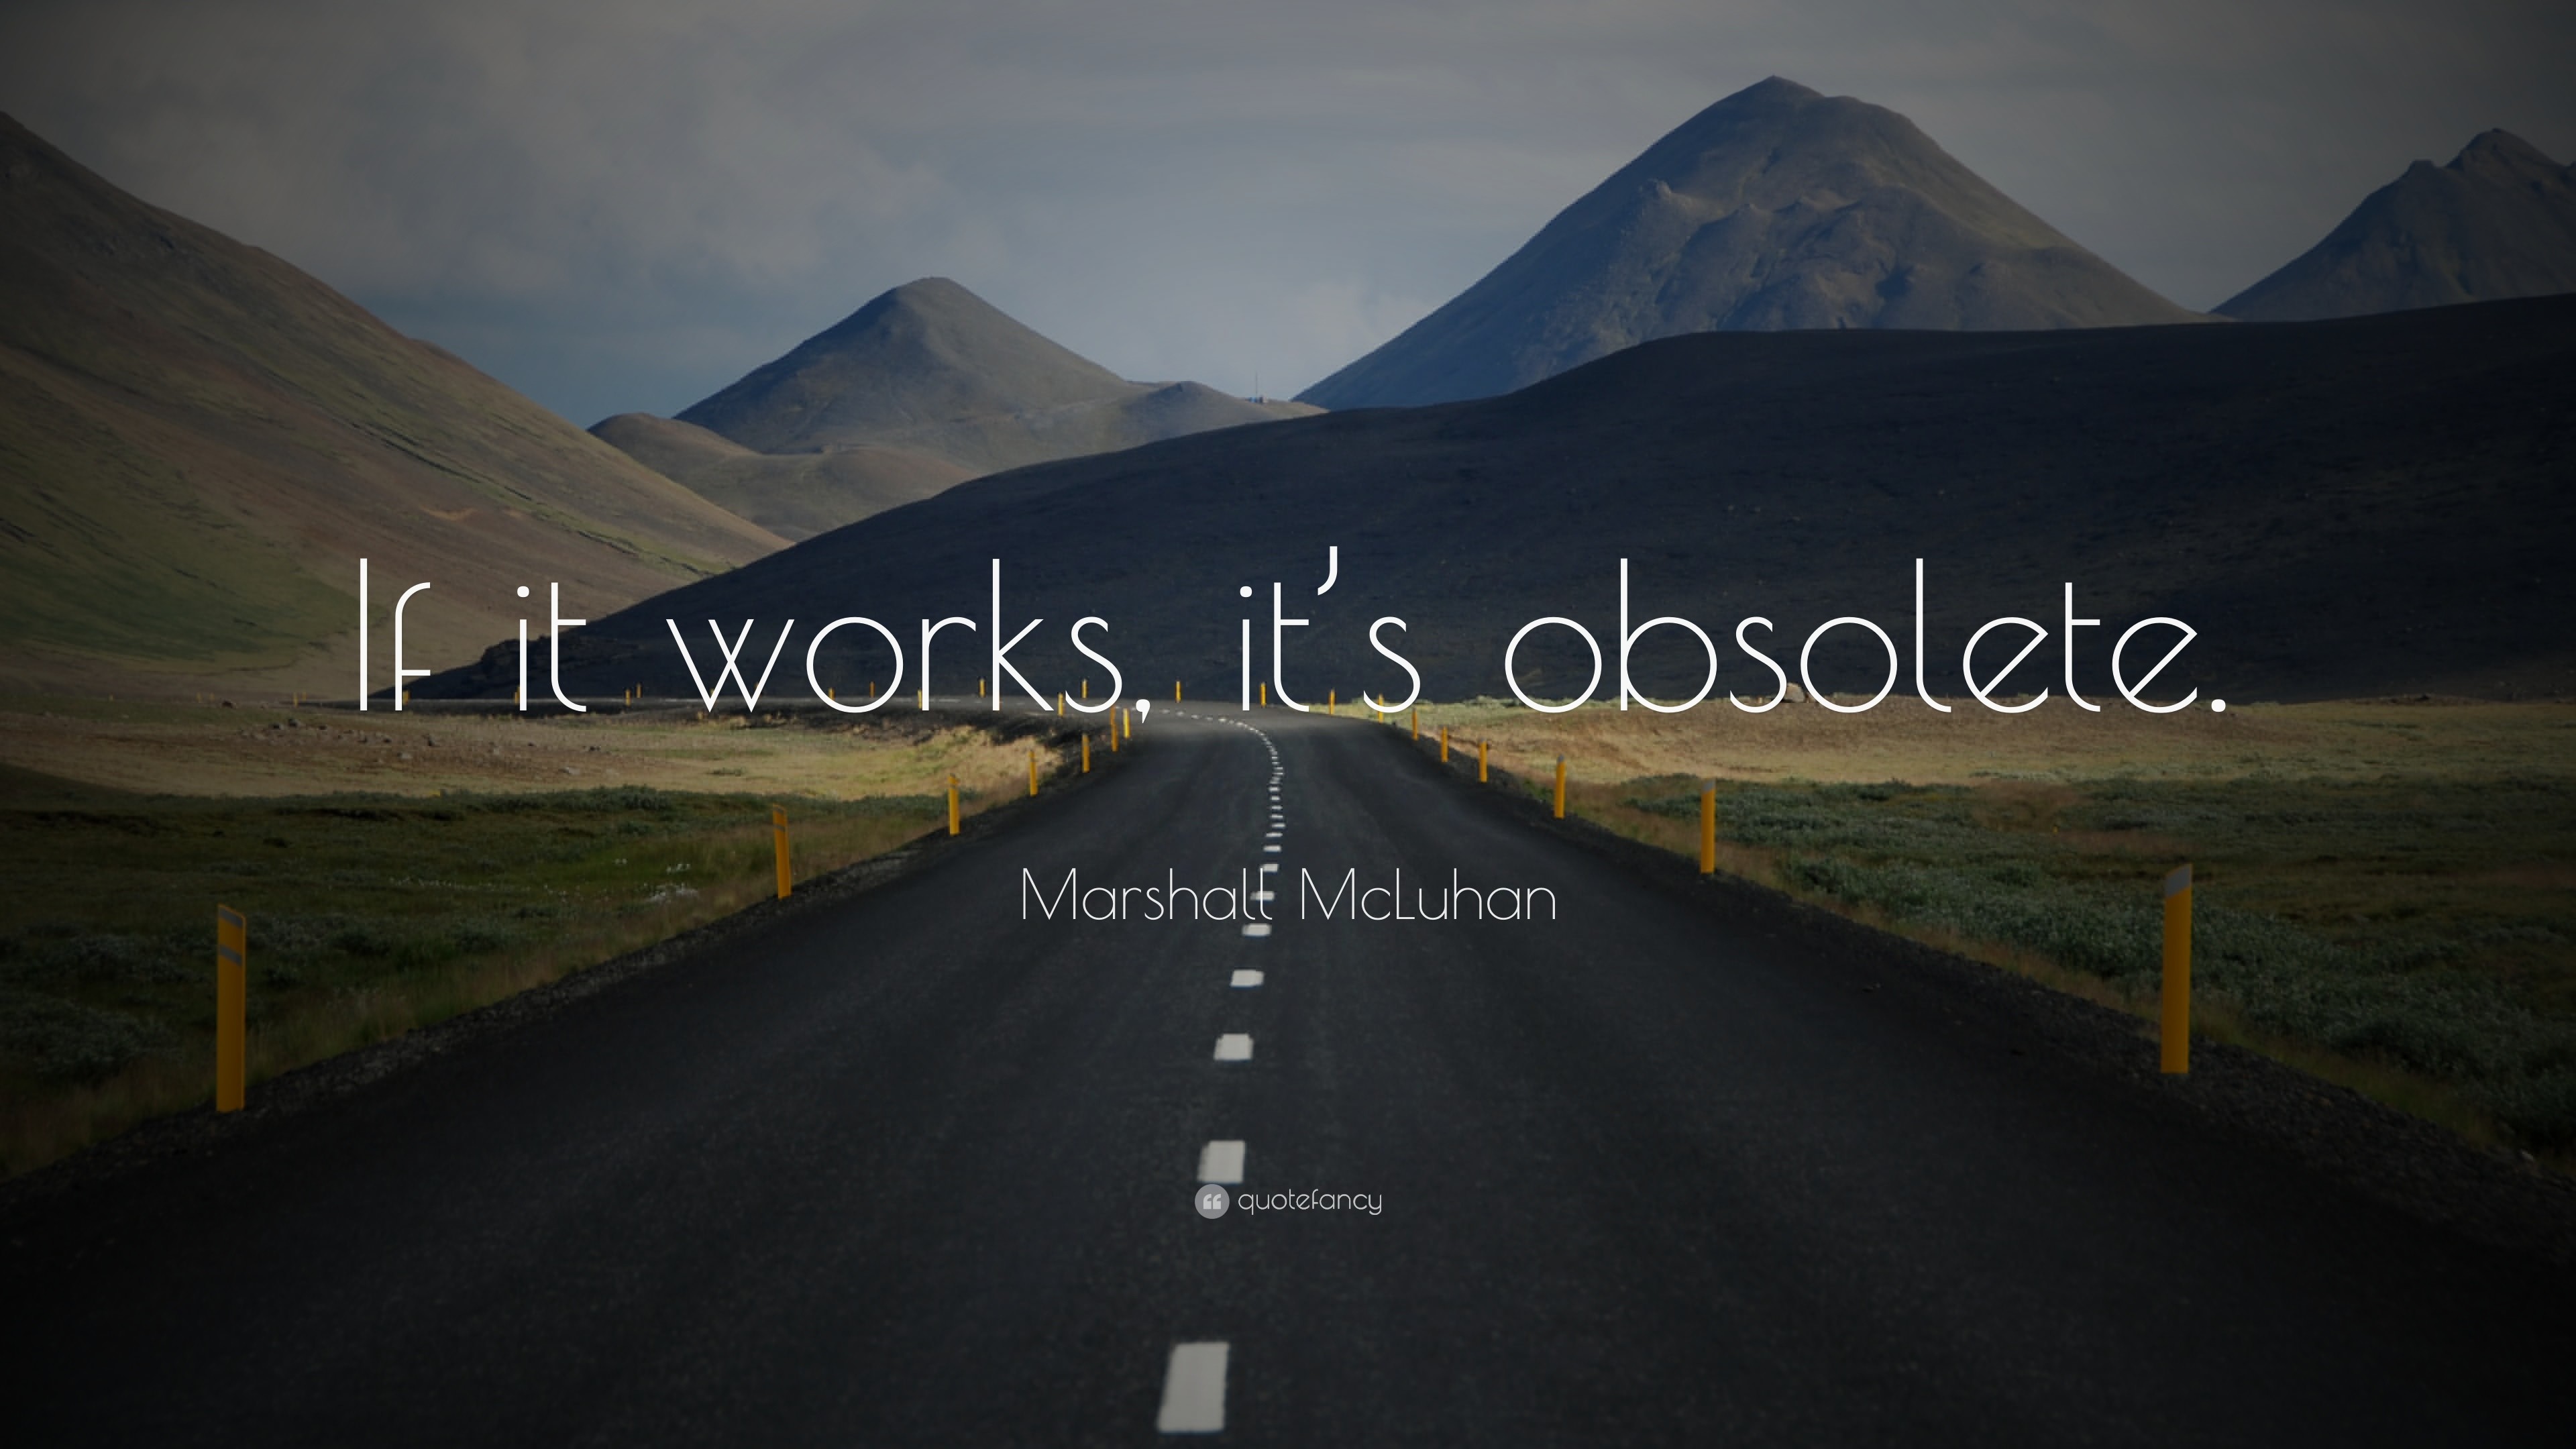 3840x2160 Marshall McLuhan Quote: “If it works, it's obsolete.”